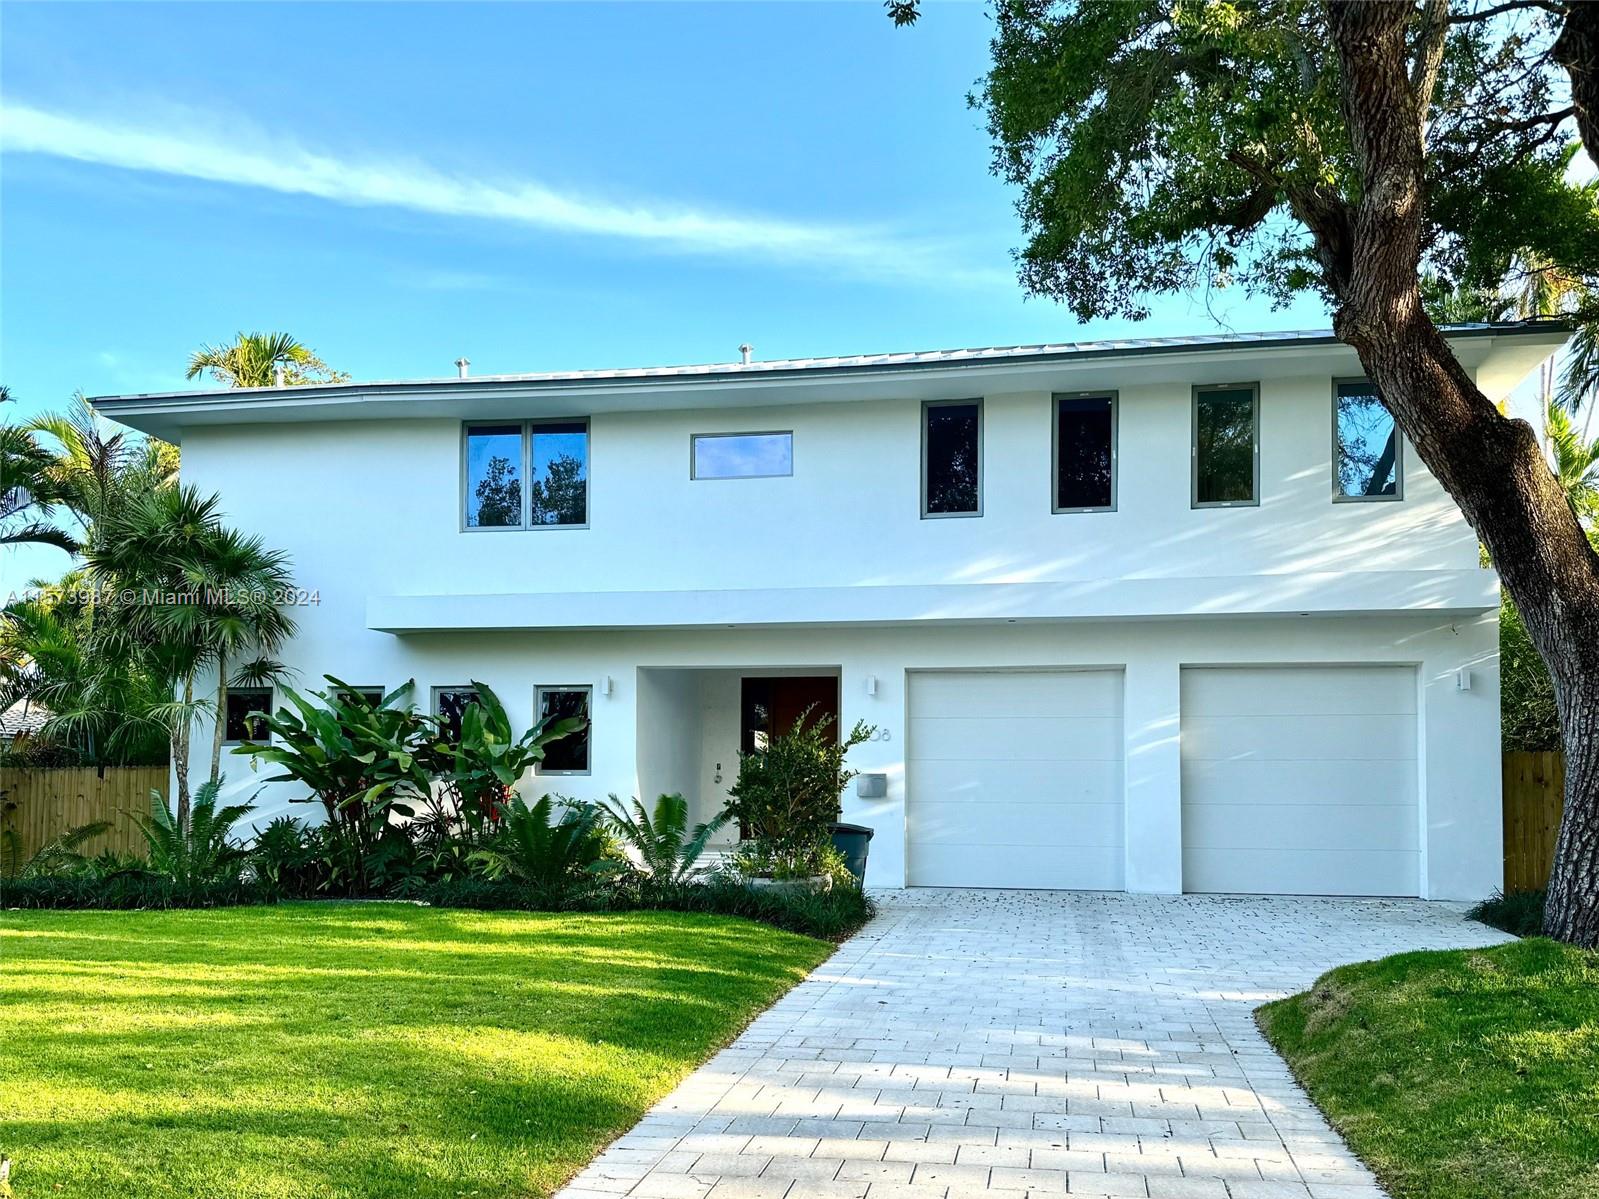 Property for Sale at 1208 Ne 99th St St, Miami Shores, Miami-Dade County, Florida - Bedrooms: 5 
Bathrooms: 6  - $5,385,000